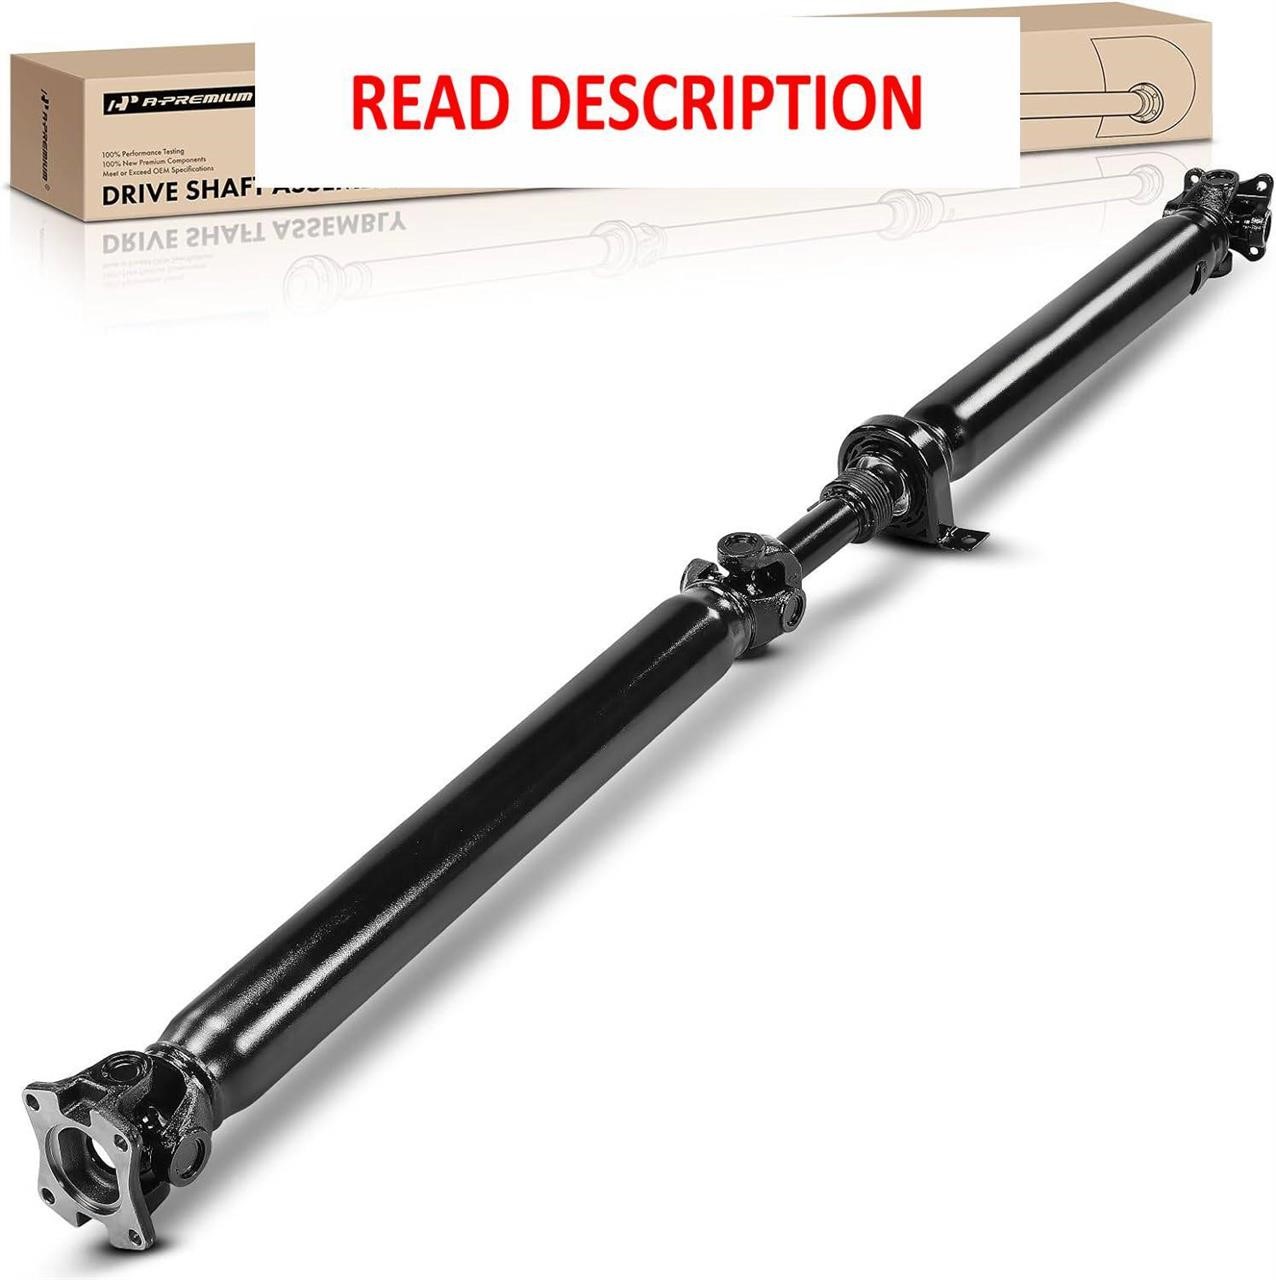 $314  F-250 Drive Shaft Assembly  2011-13  4WD